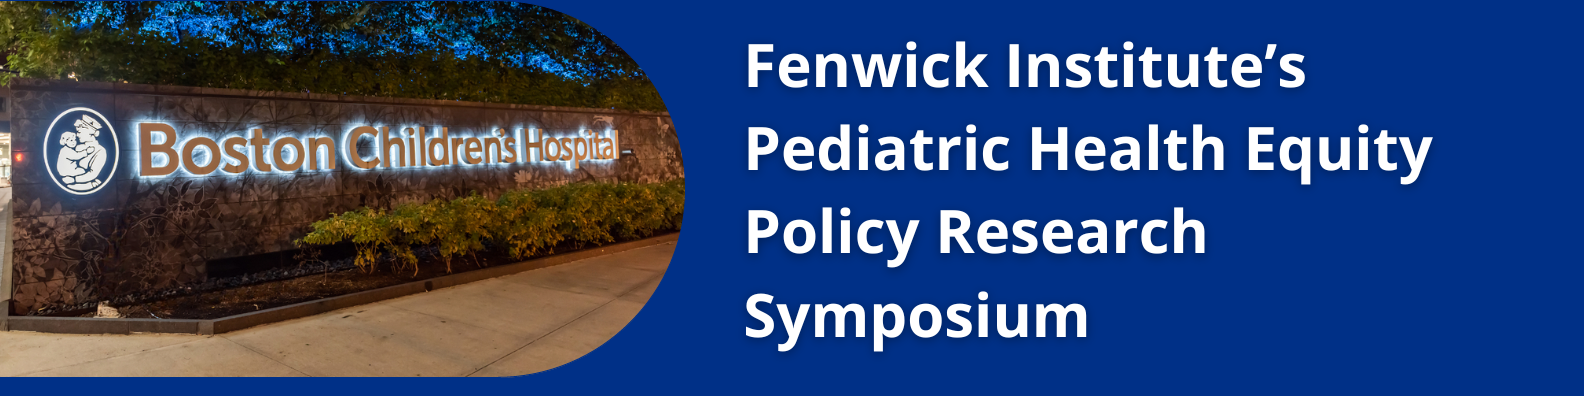 The Fenwick Institute's Pediatric Health Equity Policy Research Symposium Banner